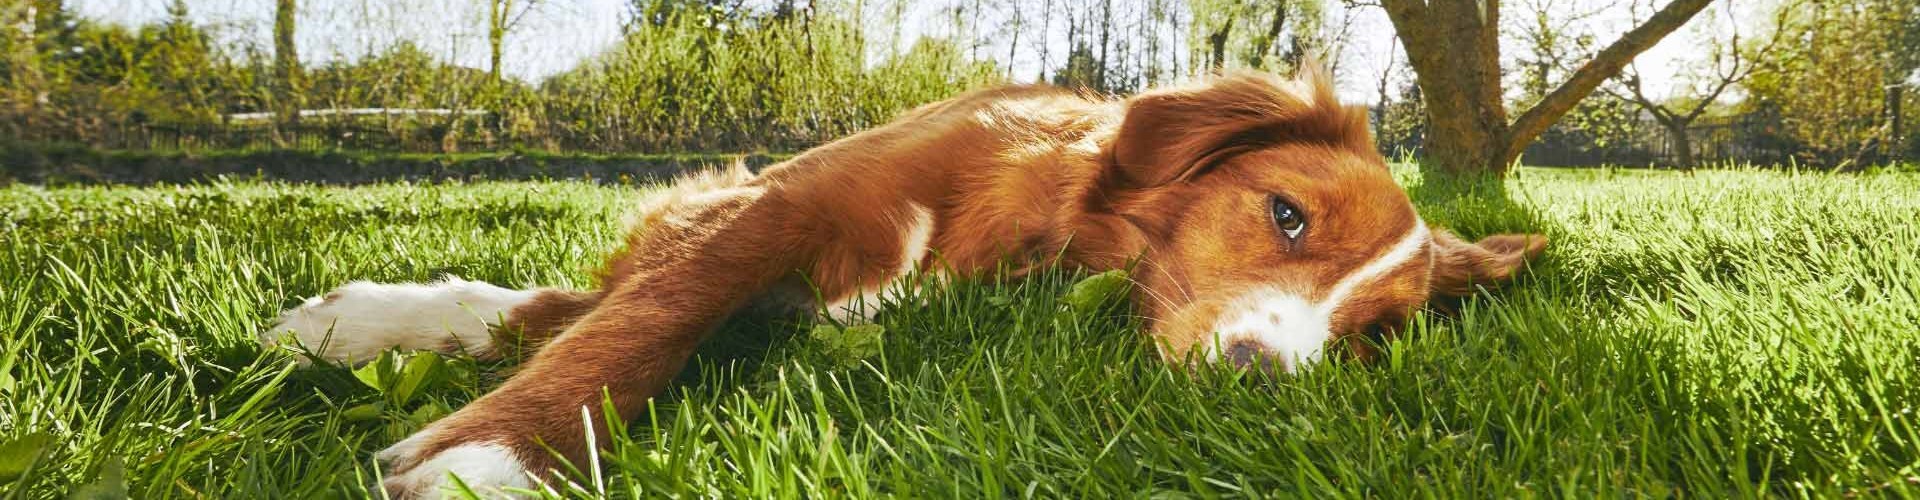 Symptoms of worms in dogs